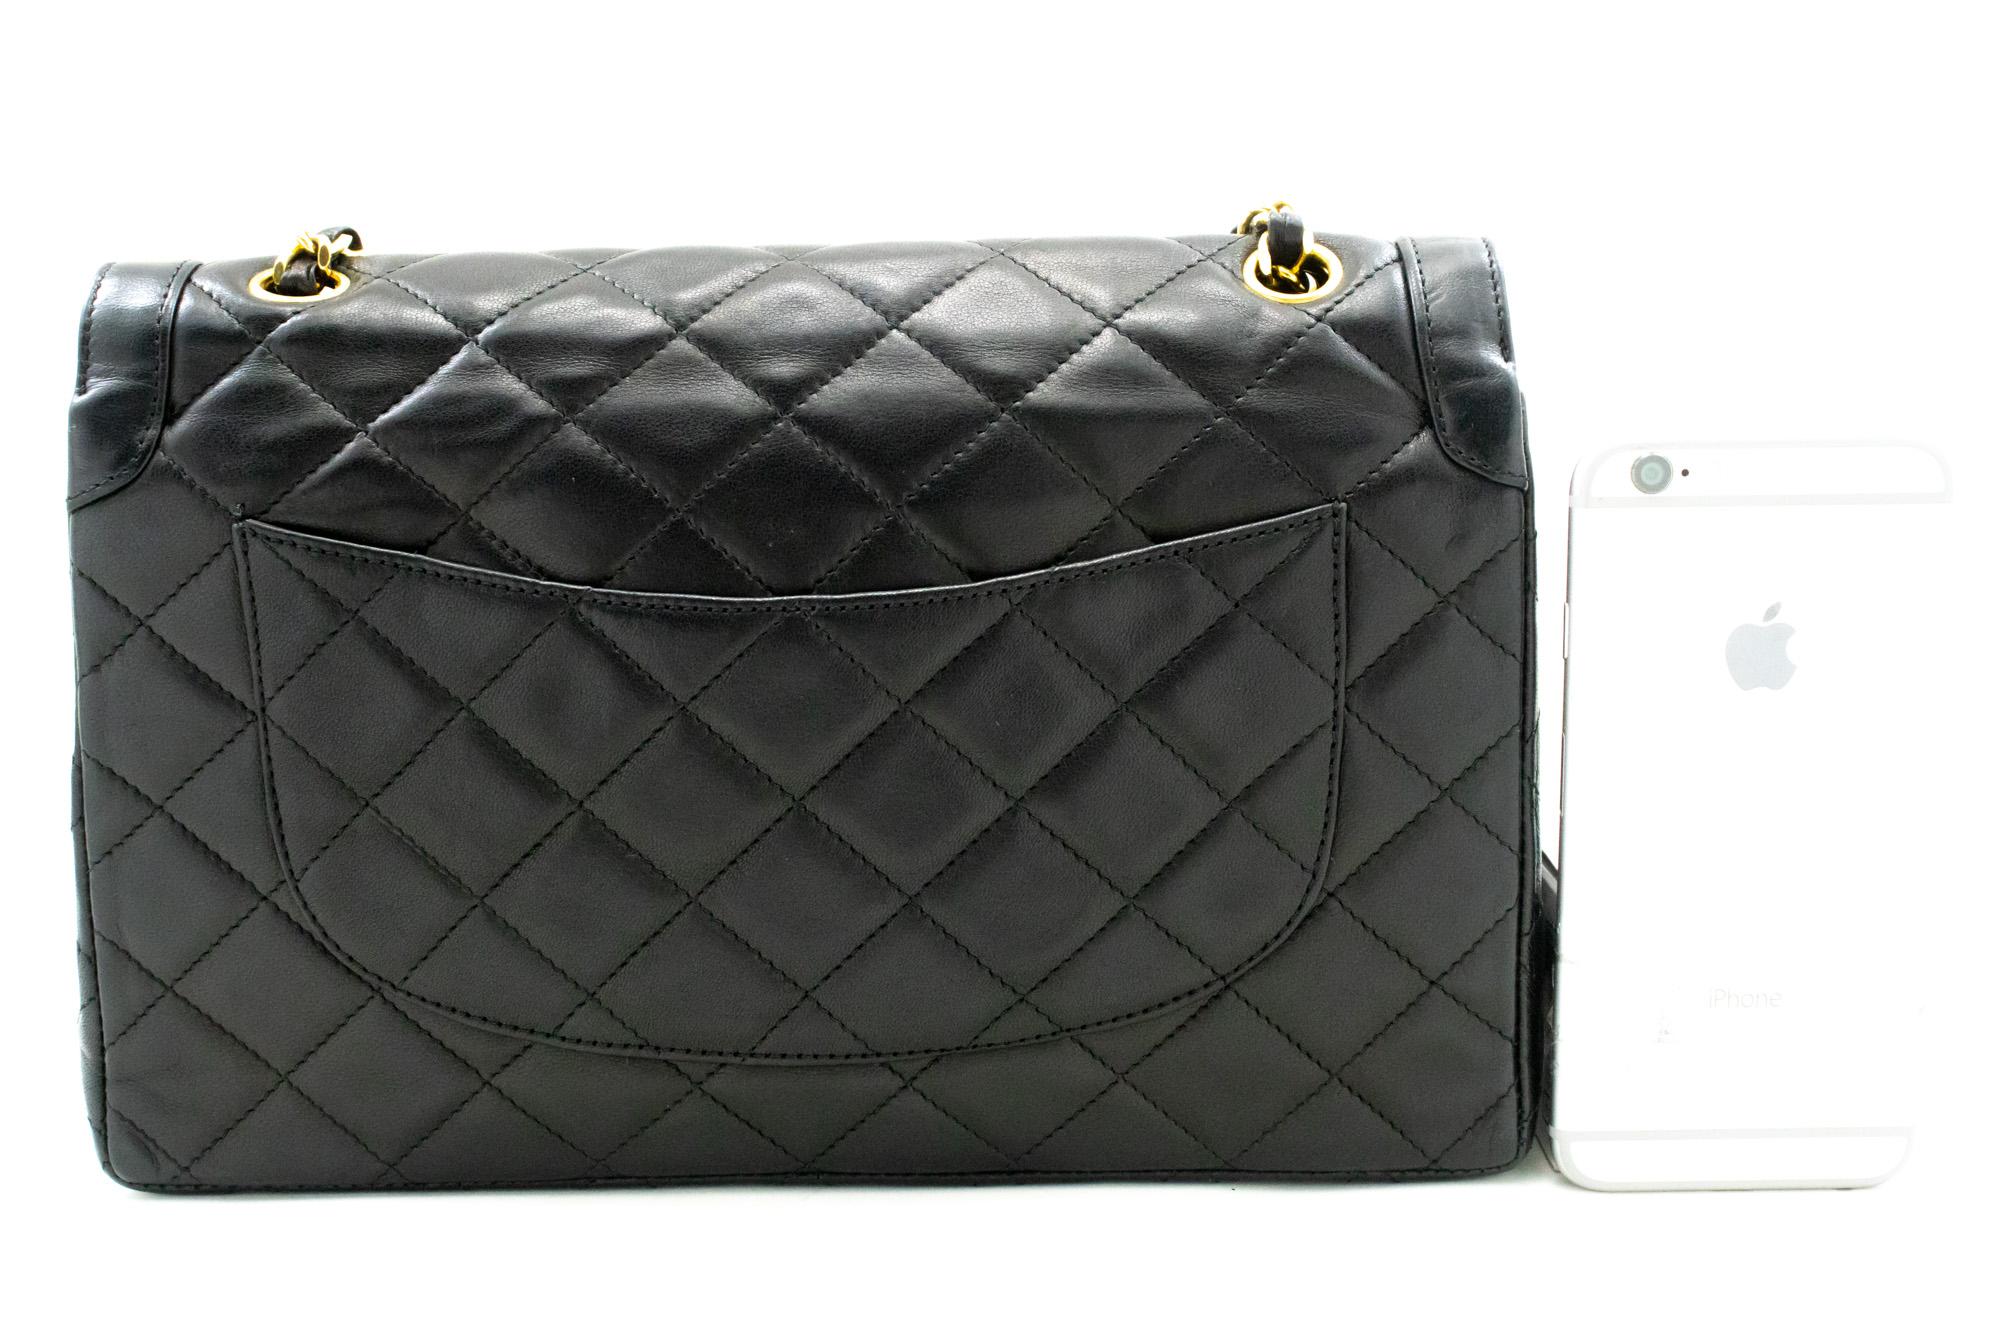 CHANEL Paris Limited Chain Shoulder Bag Black Quilted Double Flap In Good Condition For Sale In Takamatsu-shi, JP